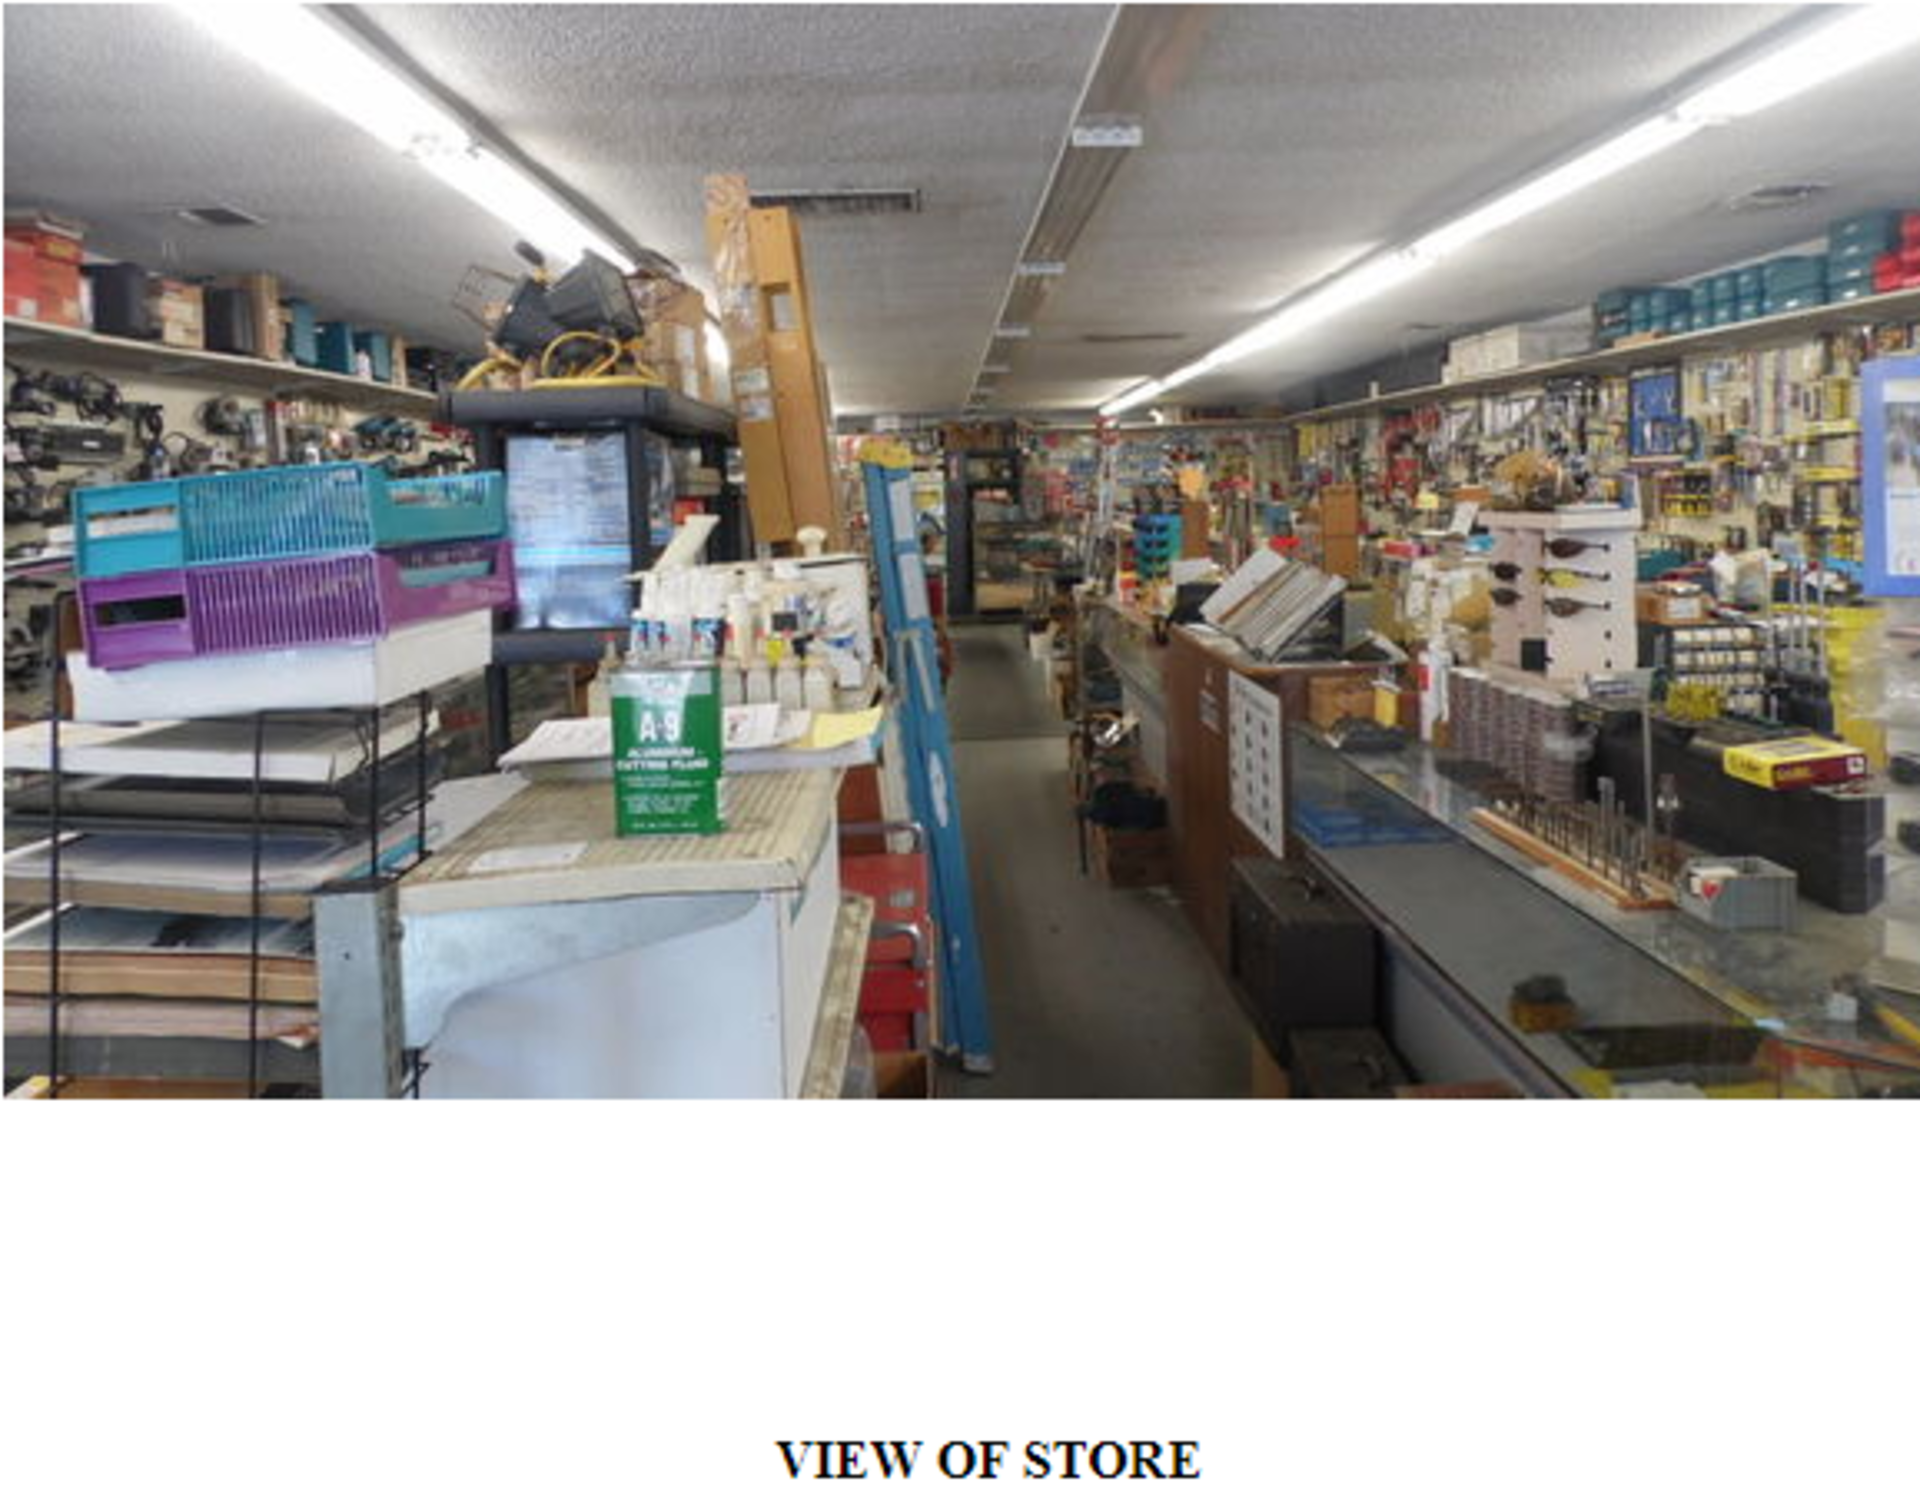 Catalog Coming! Tool Store Auction - Retiring after 38 years - Nice Assortment of Tools!